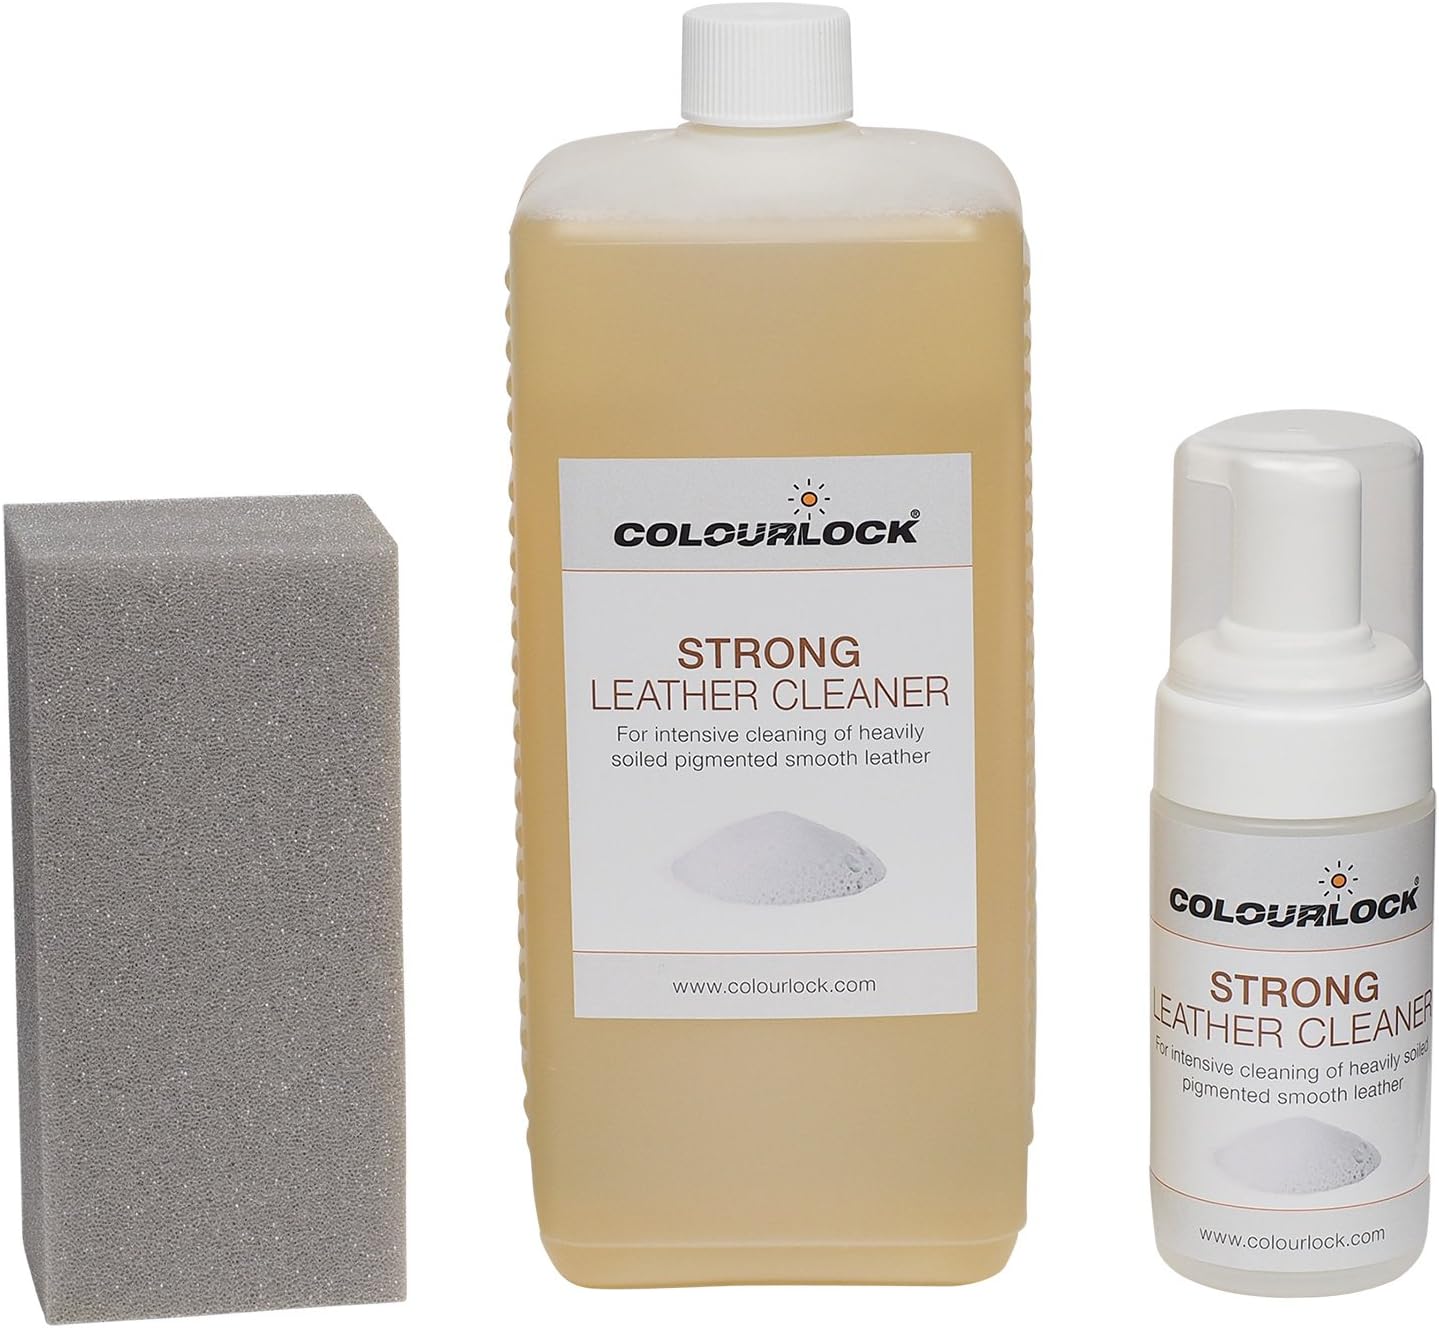 COLOURLOCK Strong Leather Cleaner for Car interiors, Furniture Upholstery, Bags and Clothing (1 Litre)